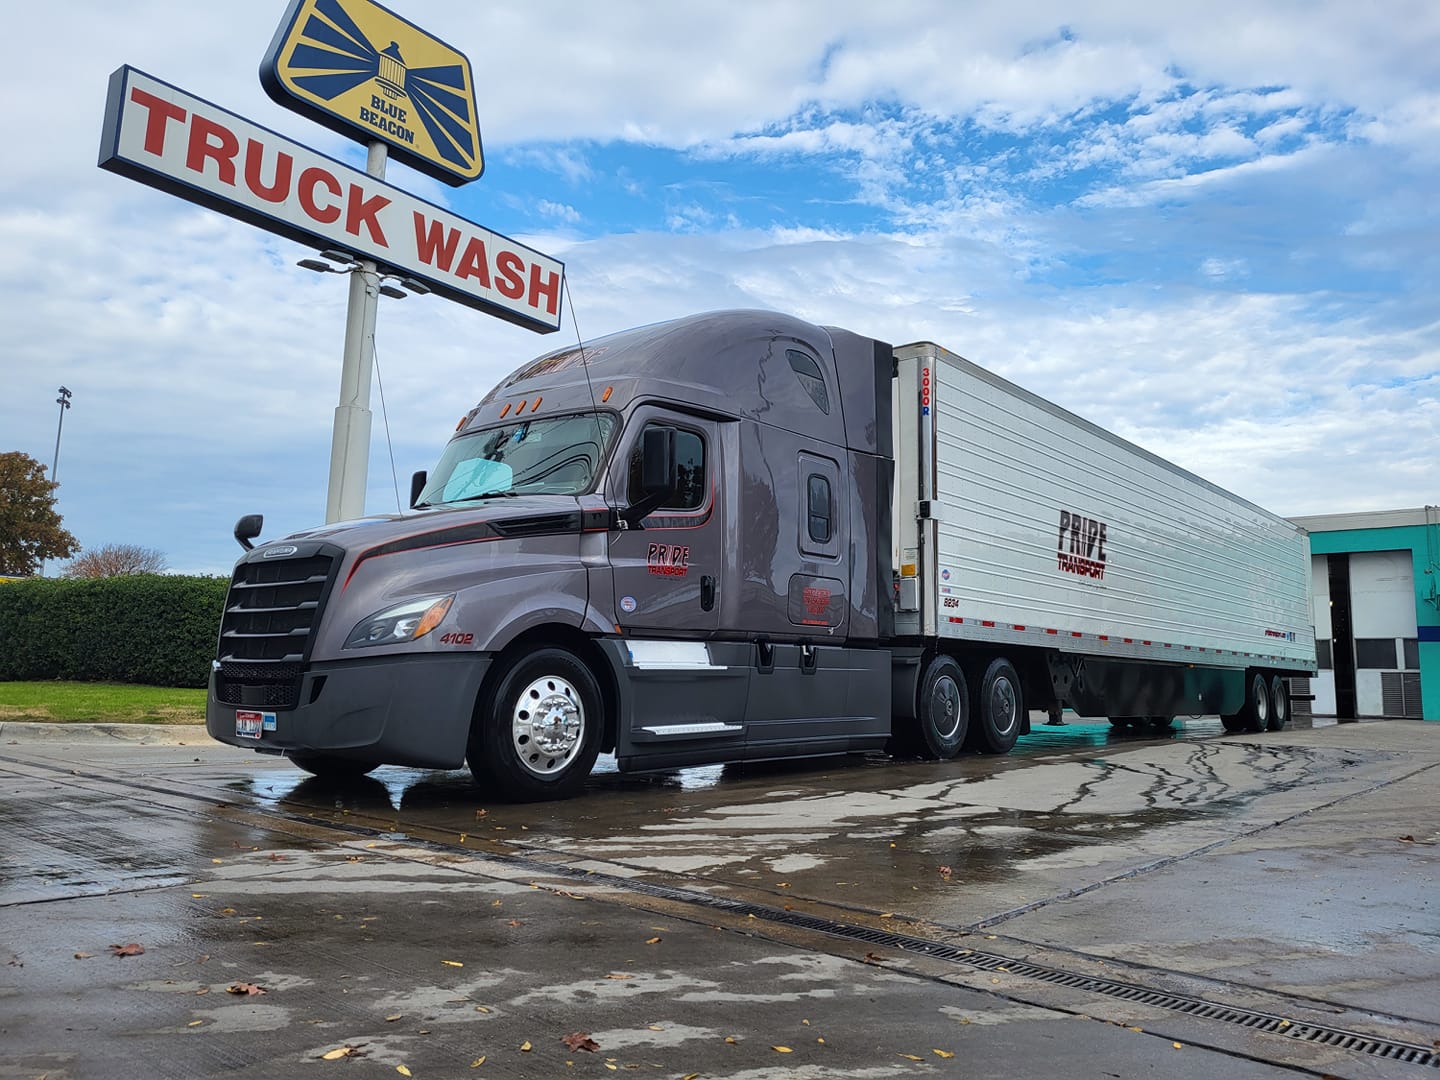 a Pride Transport truck in a truck wash station